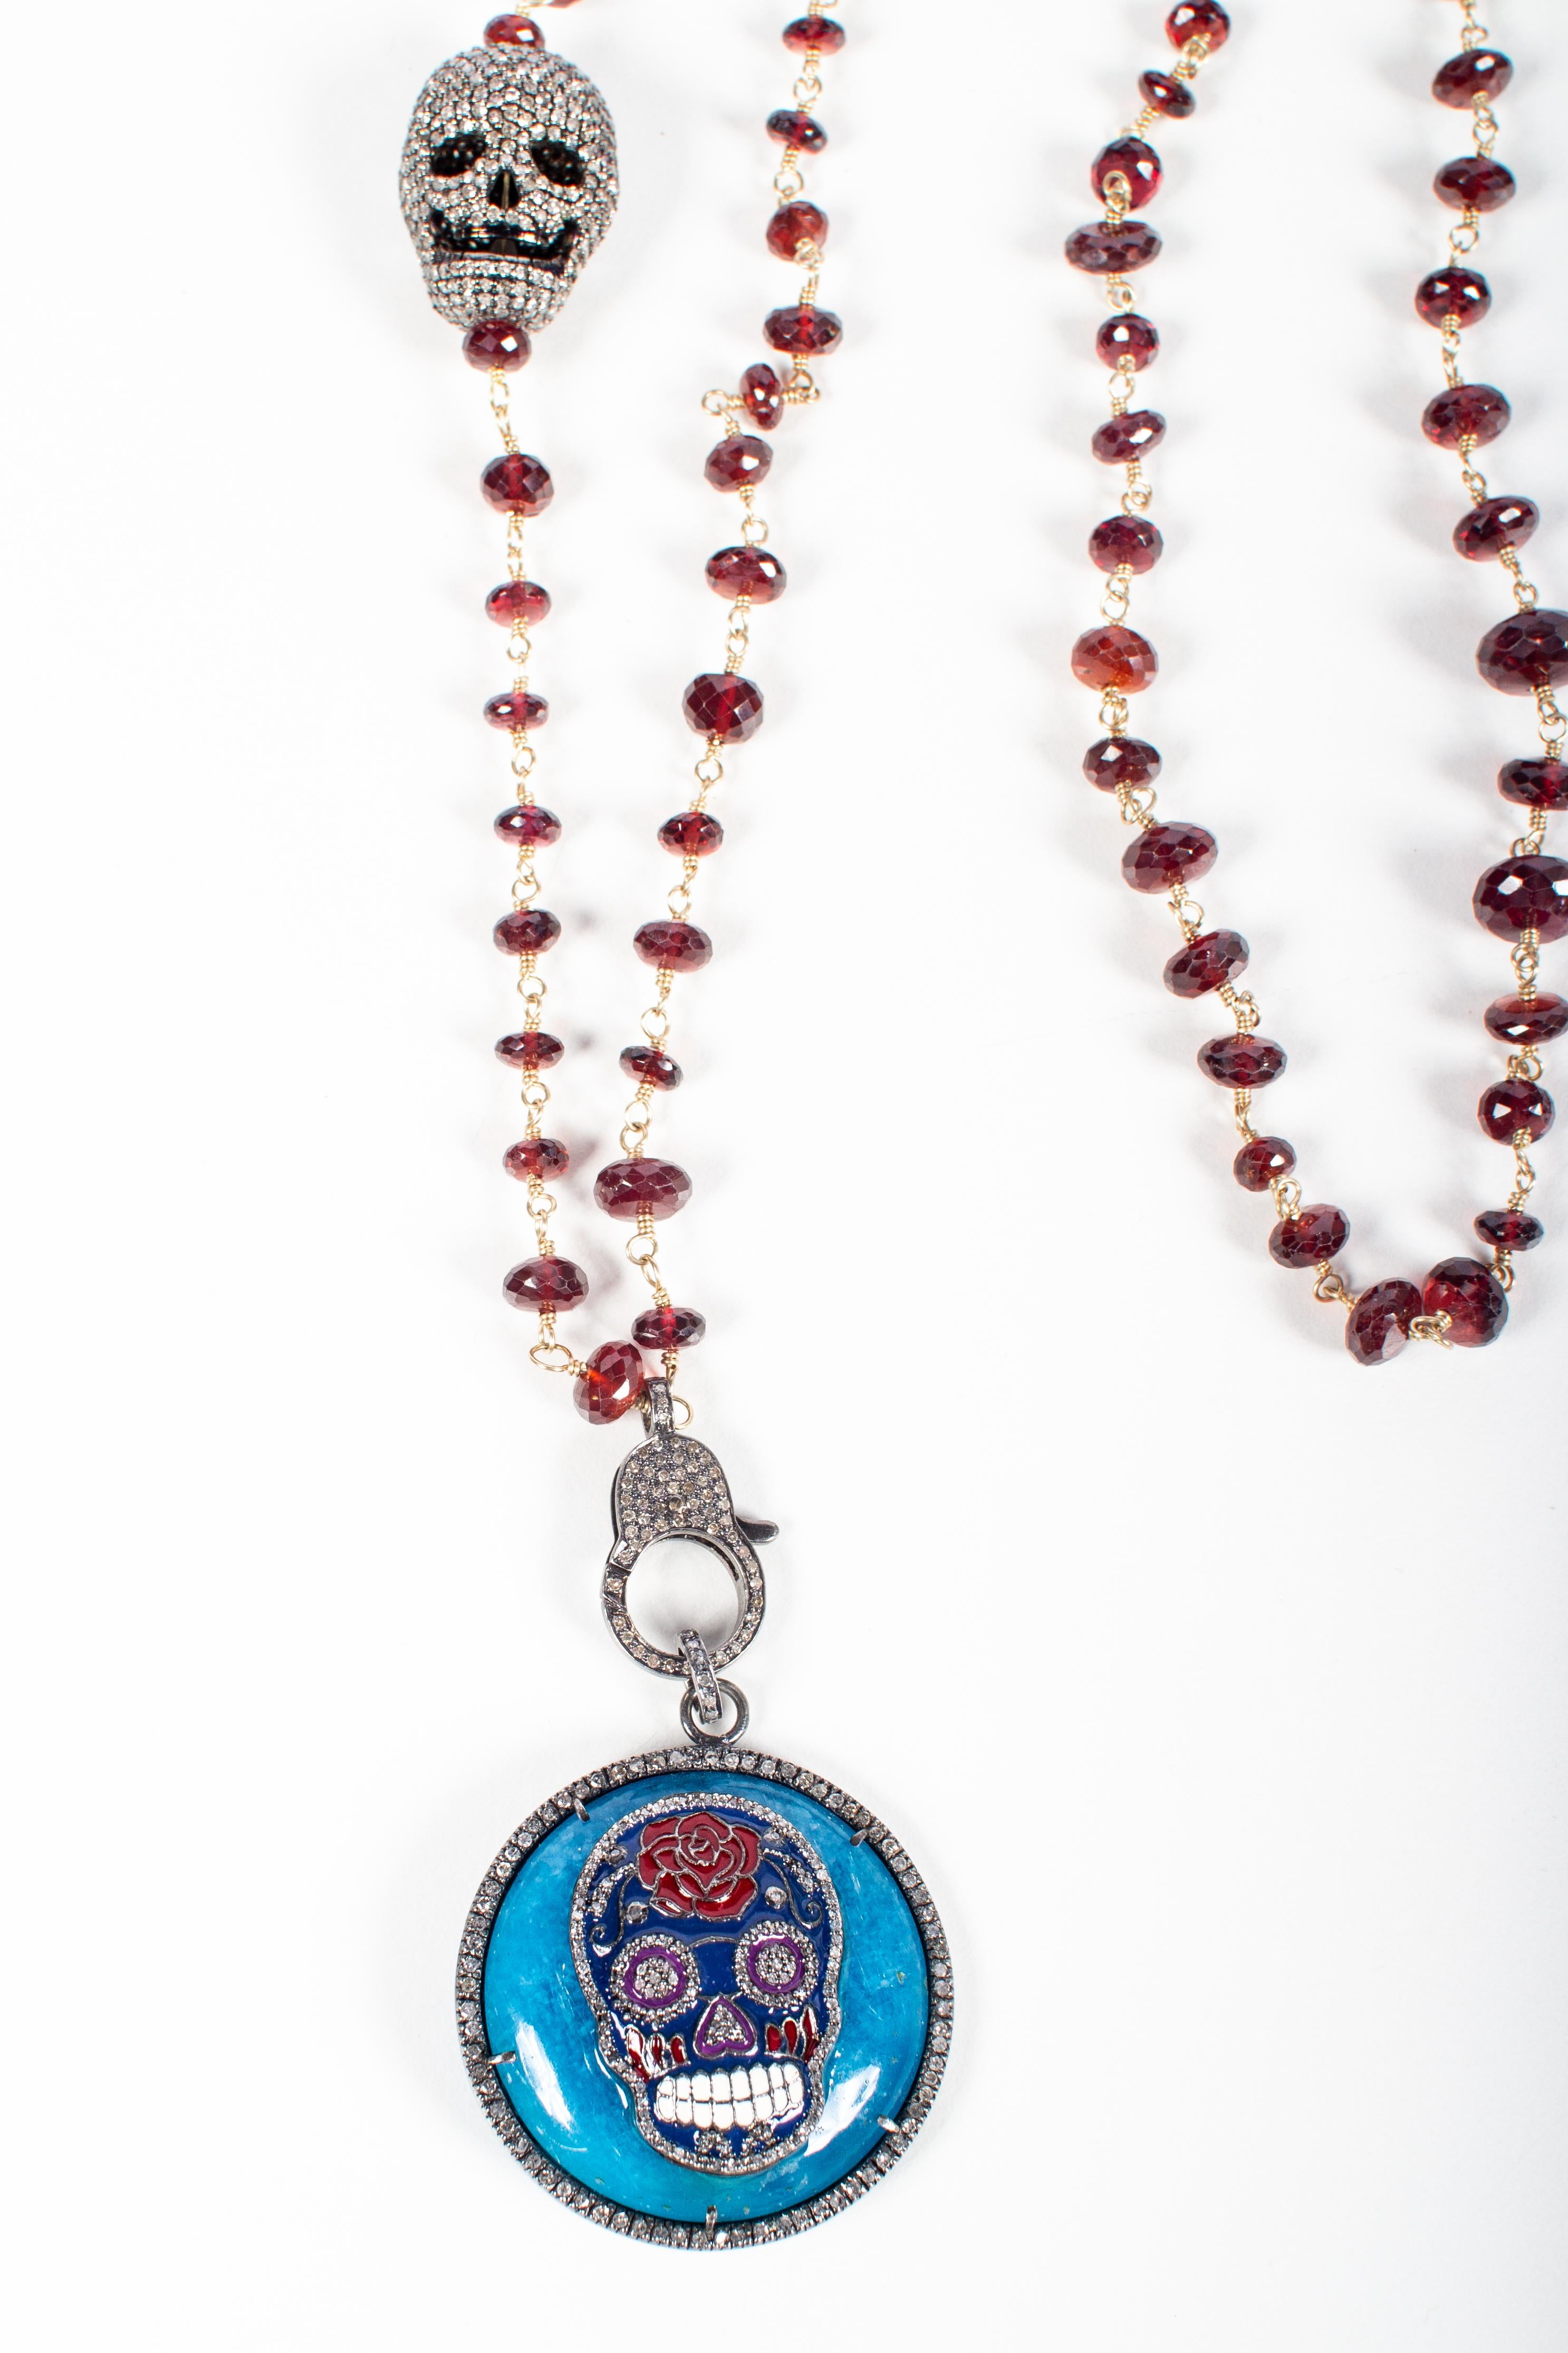 Wired Garnet beaded necklace with diamond and silver skull tumbler bead 37